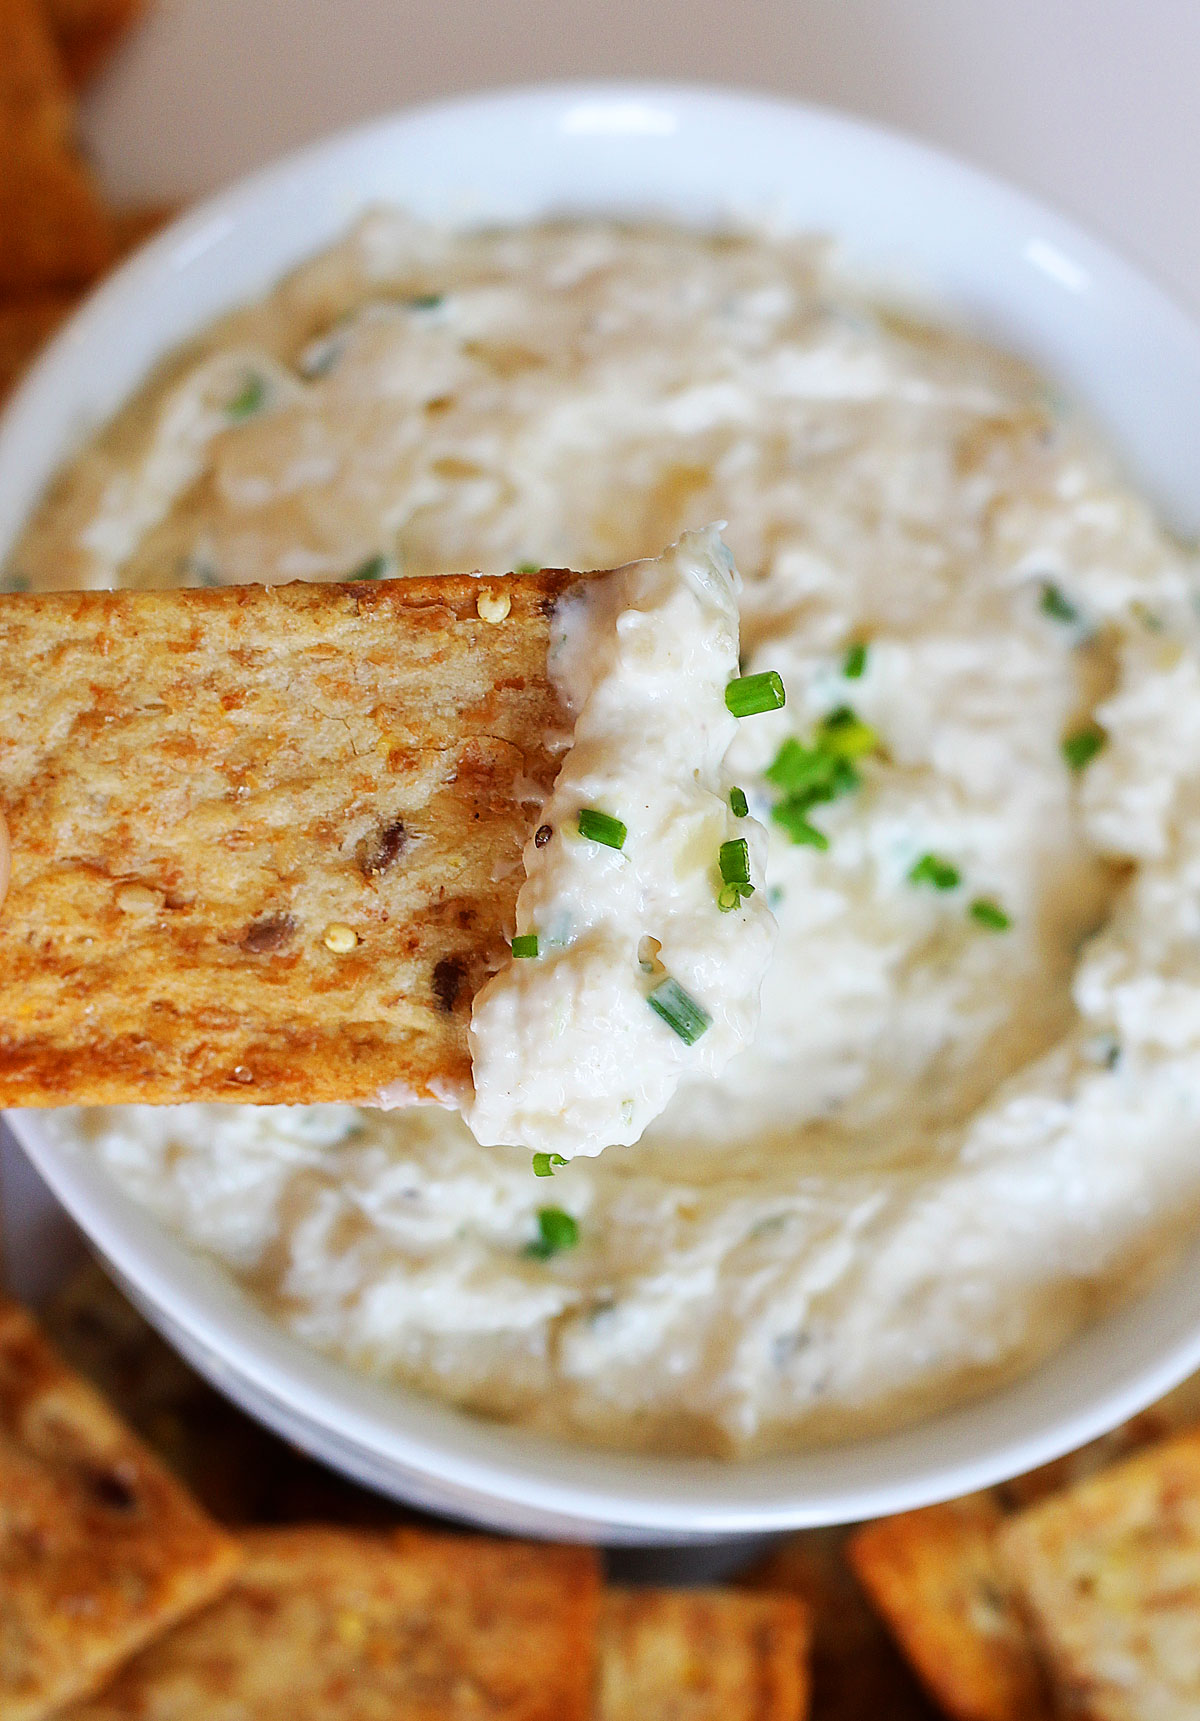 French Onion Dip is a creamy dip bursting with onion flavor. Life-in-the-Lofthouse.com